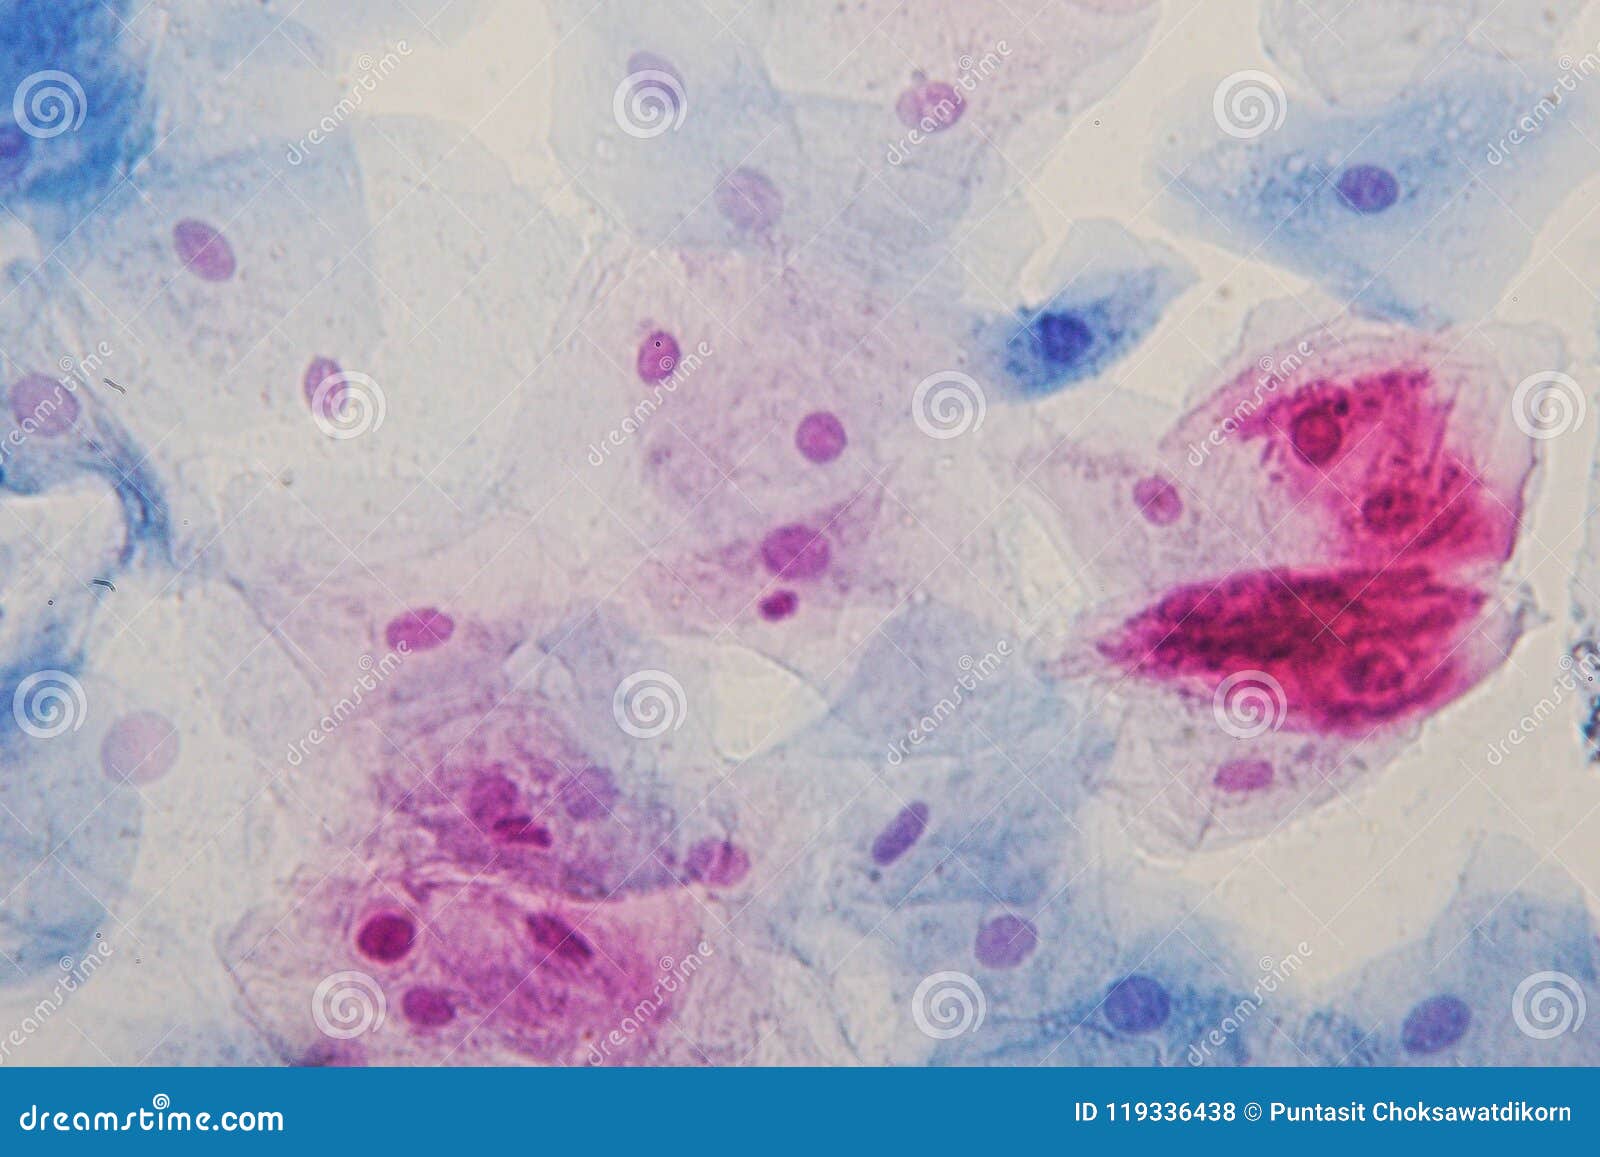 squamous epithelial cells under microscope view for education hi